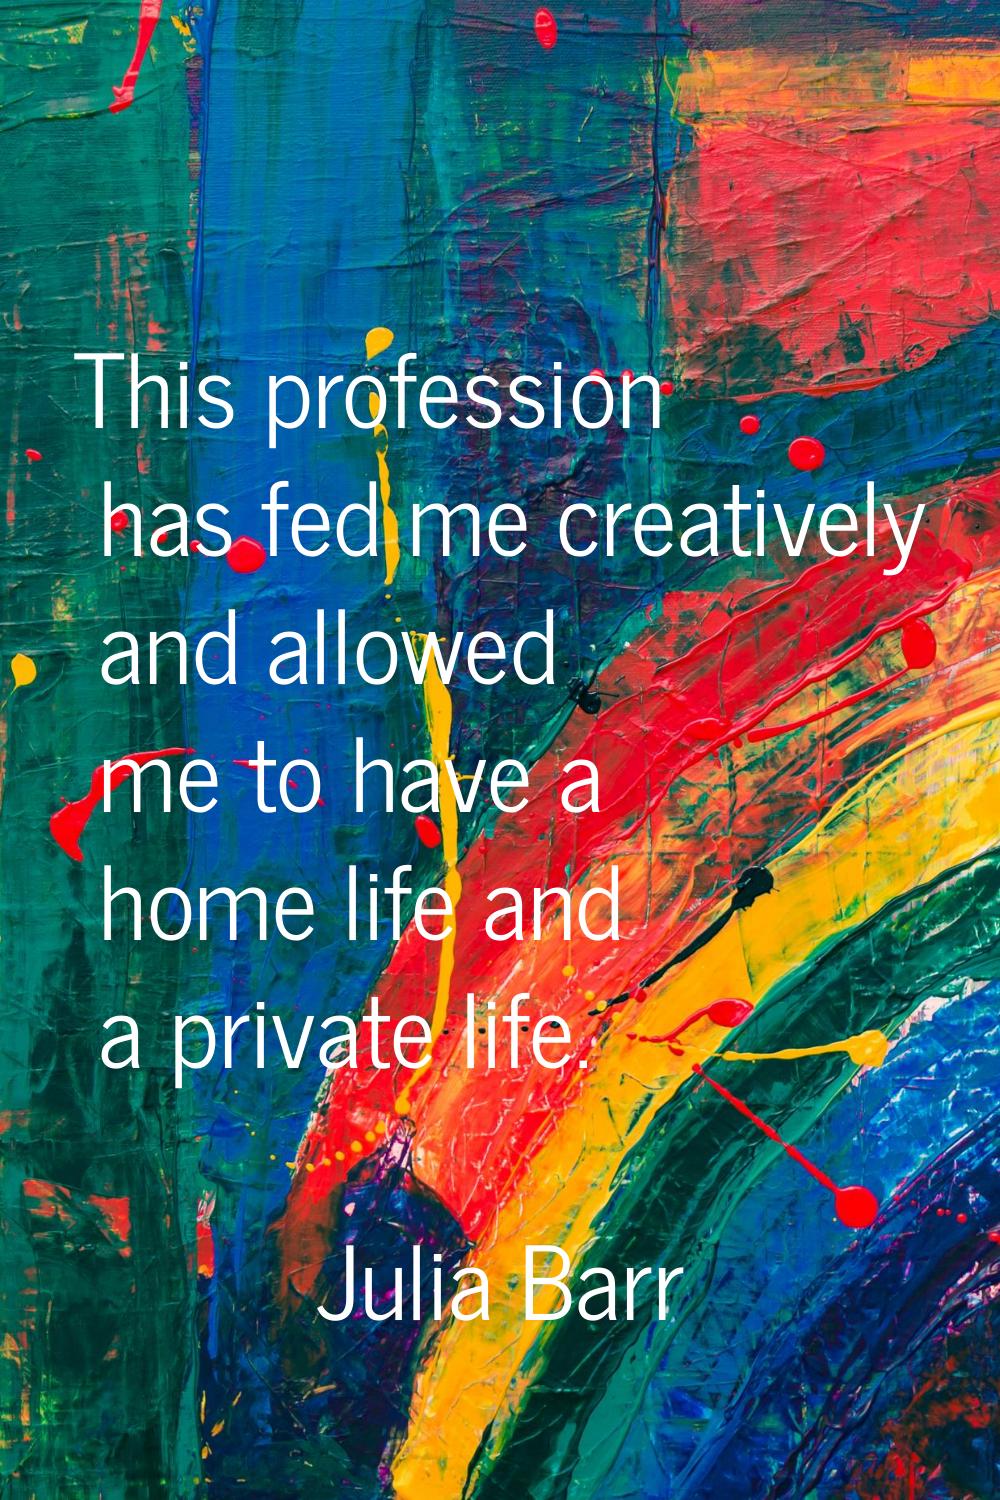 This profession has fed me creatively and allowed me to have a home life and a private life.